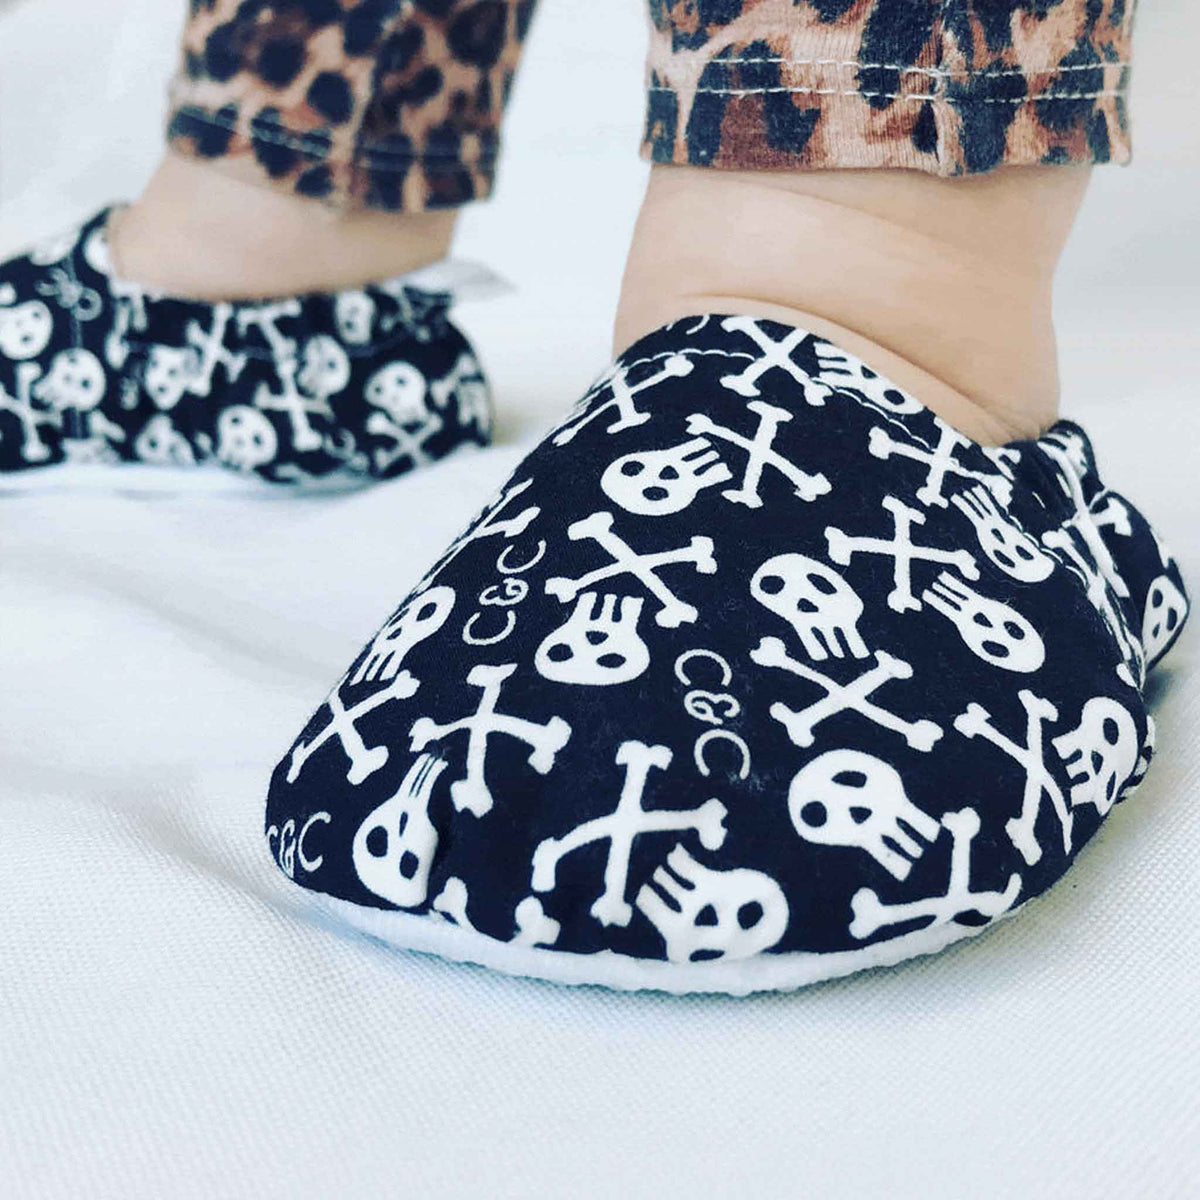 Skulls Pre -Walker baby shoes - Chuckles and Caz